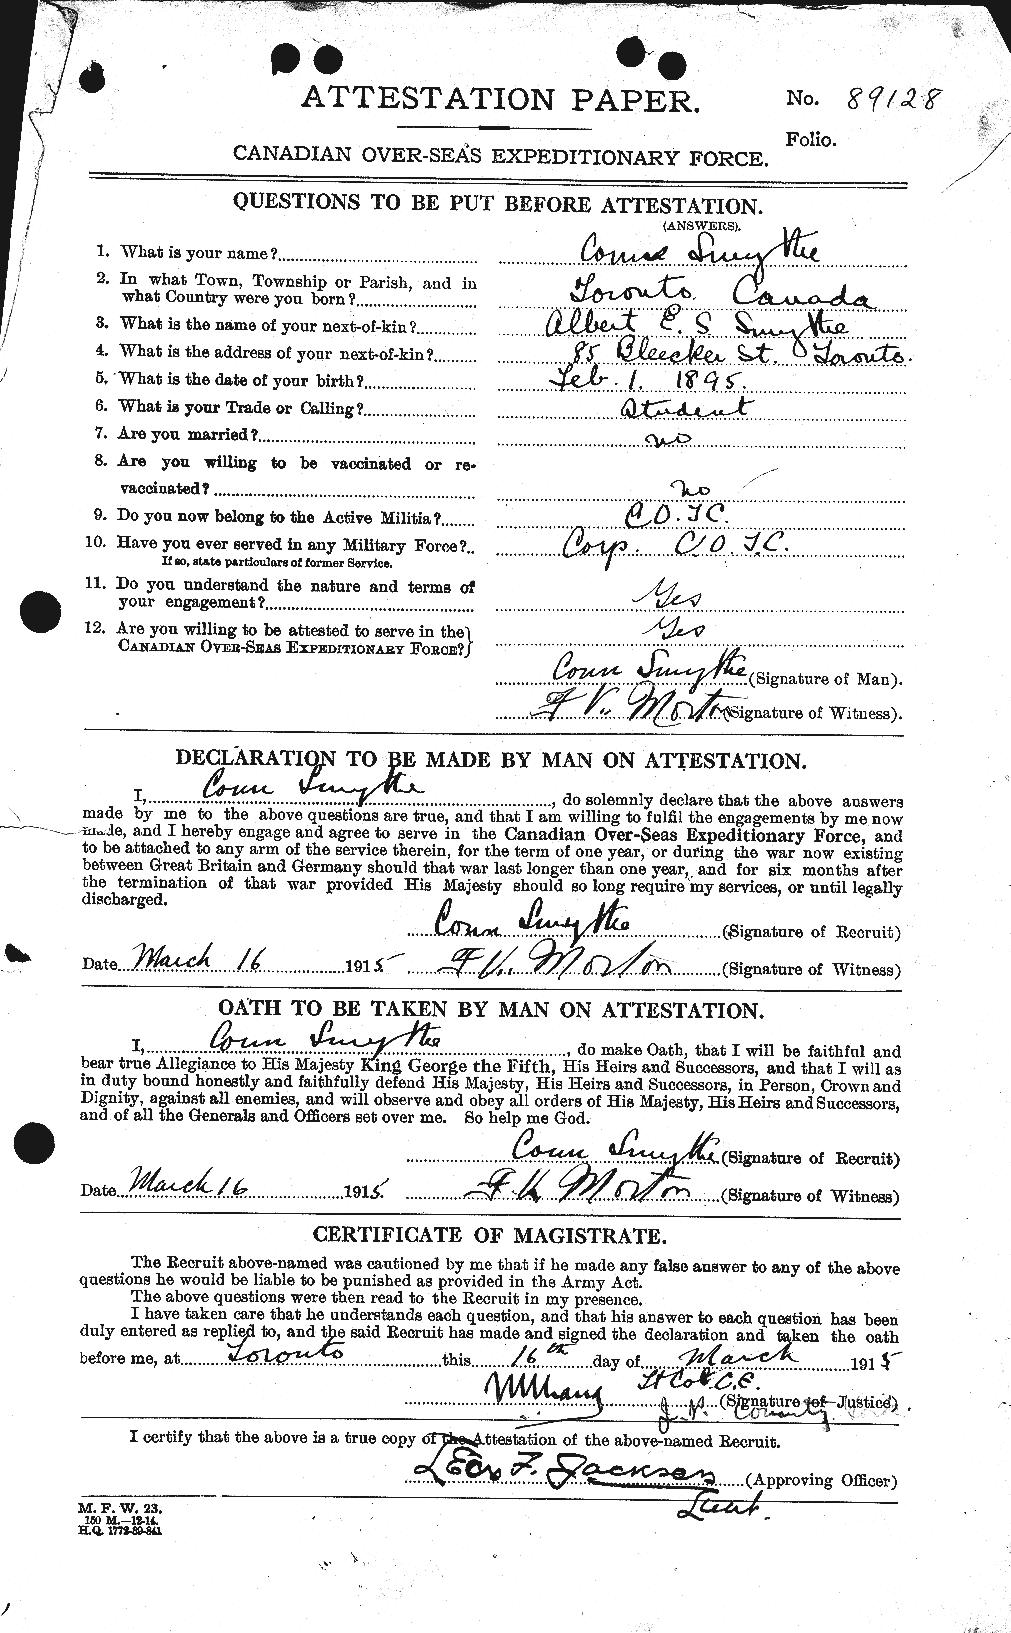 Personnel Records of the First World War - CEF 105865a